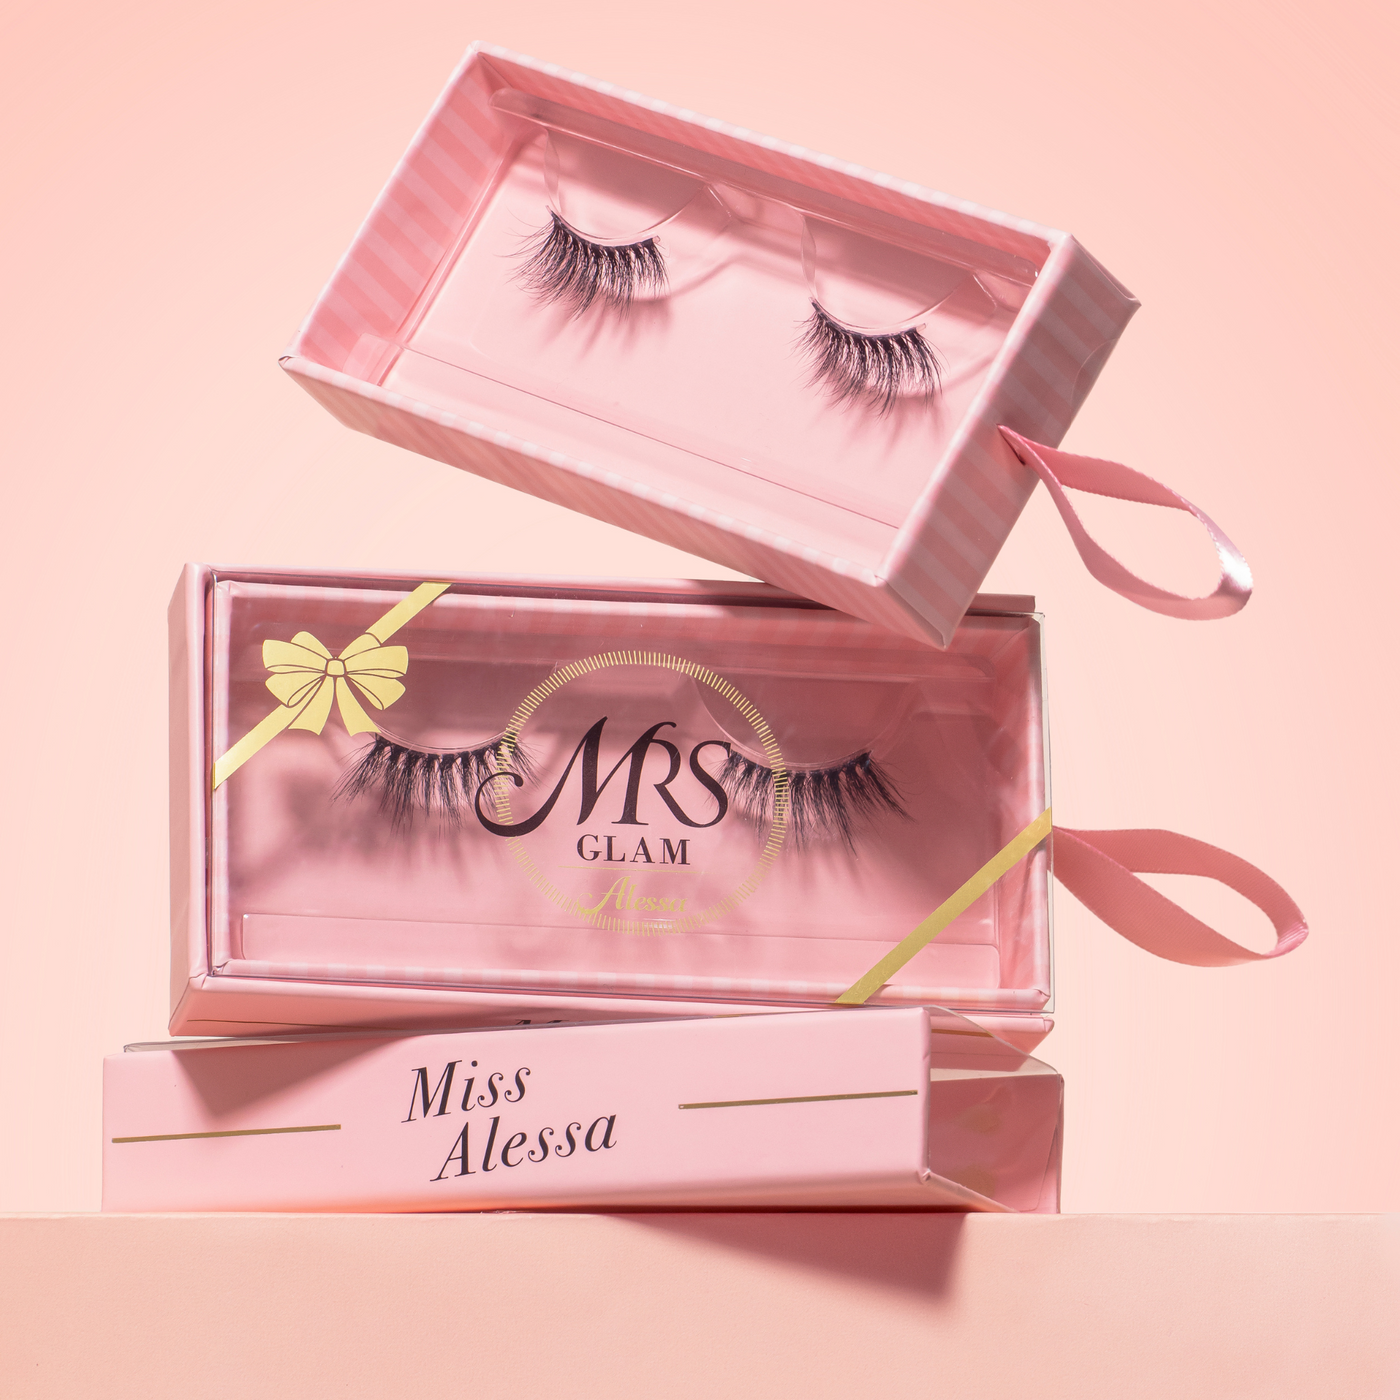 Mrs Glam - The Alessa Collection